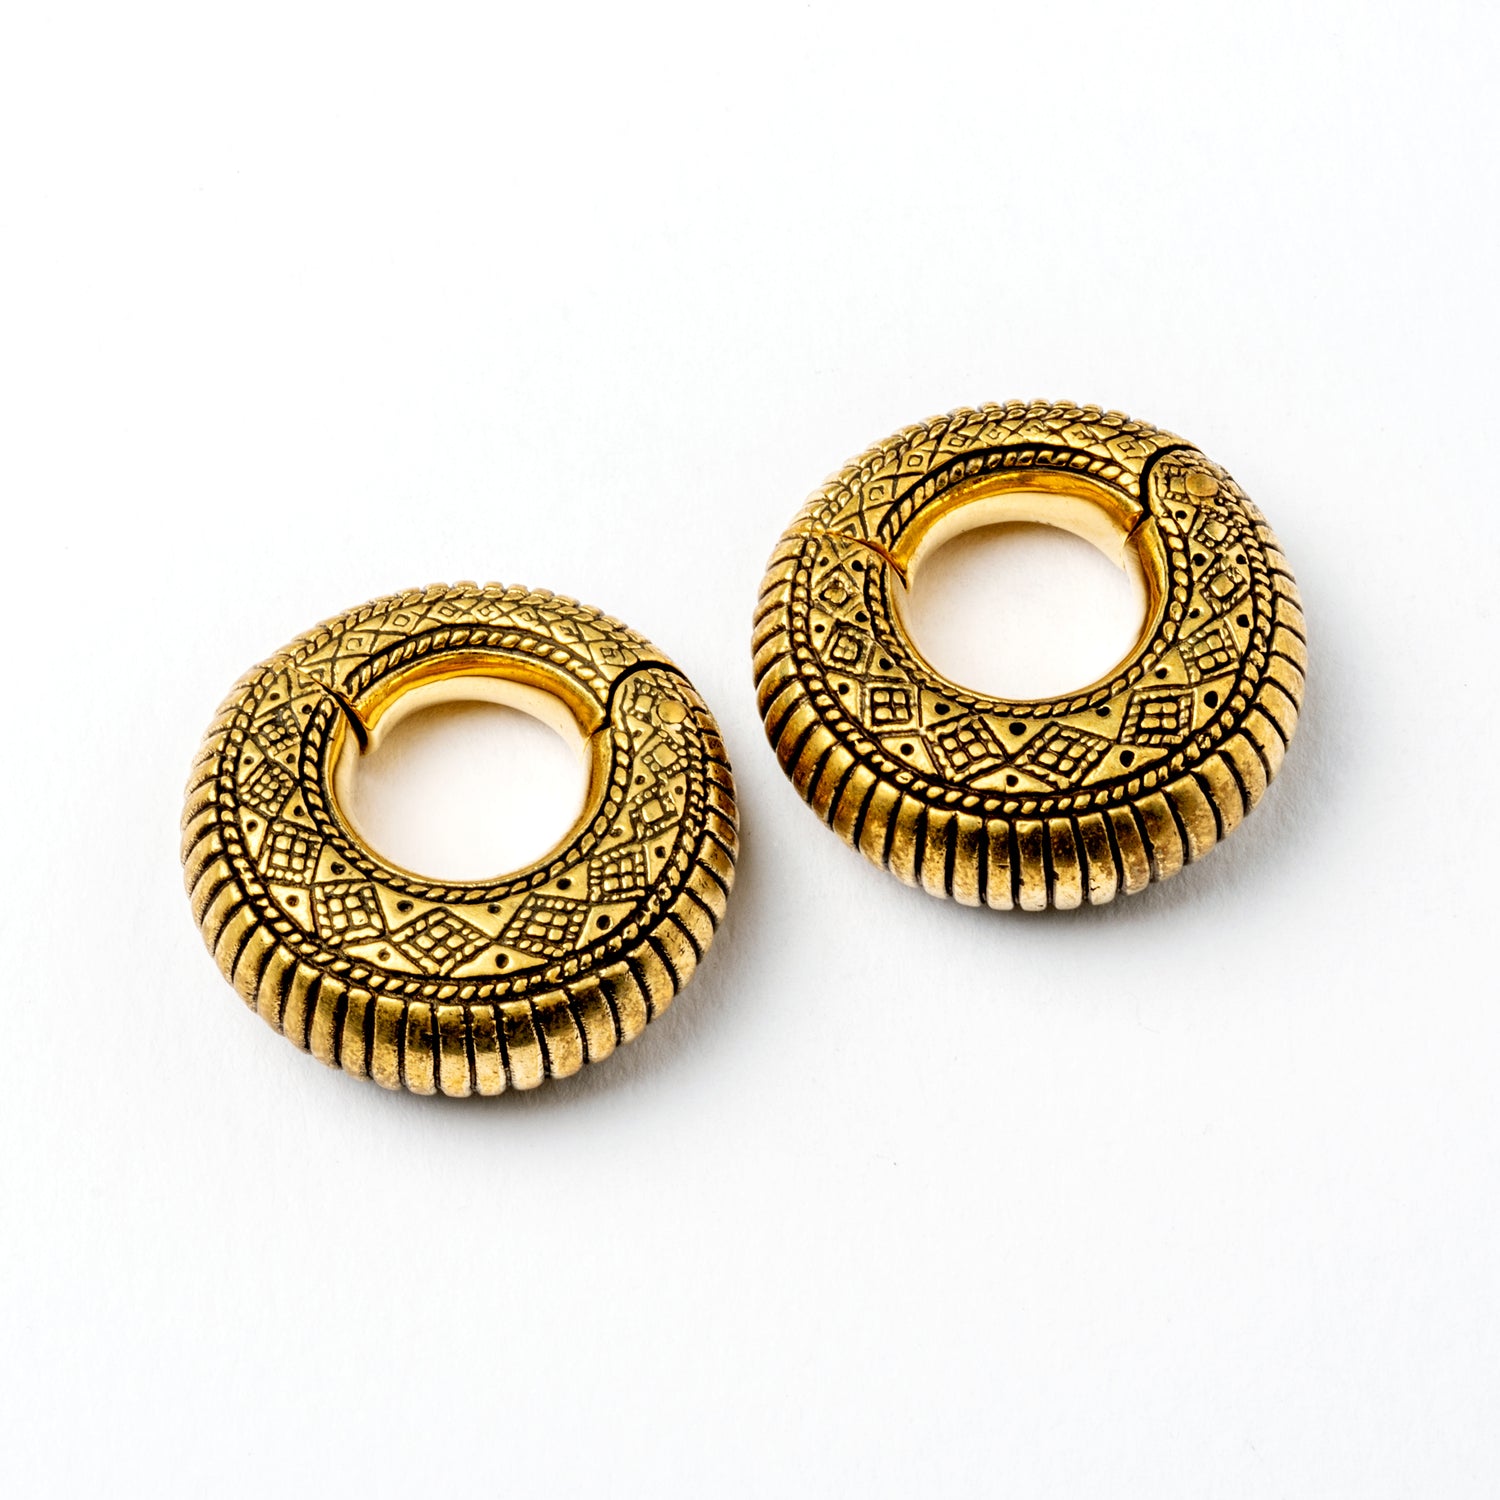 pair of gold brass ear weights hoops with geometric tribal engraved pattern right frontal view